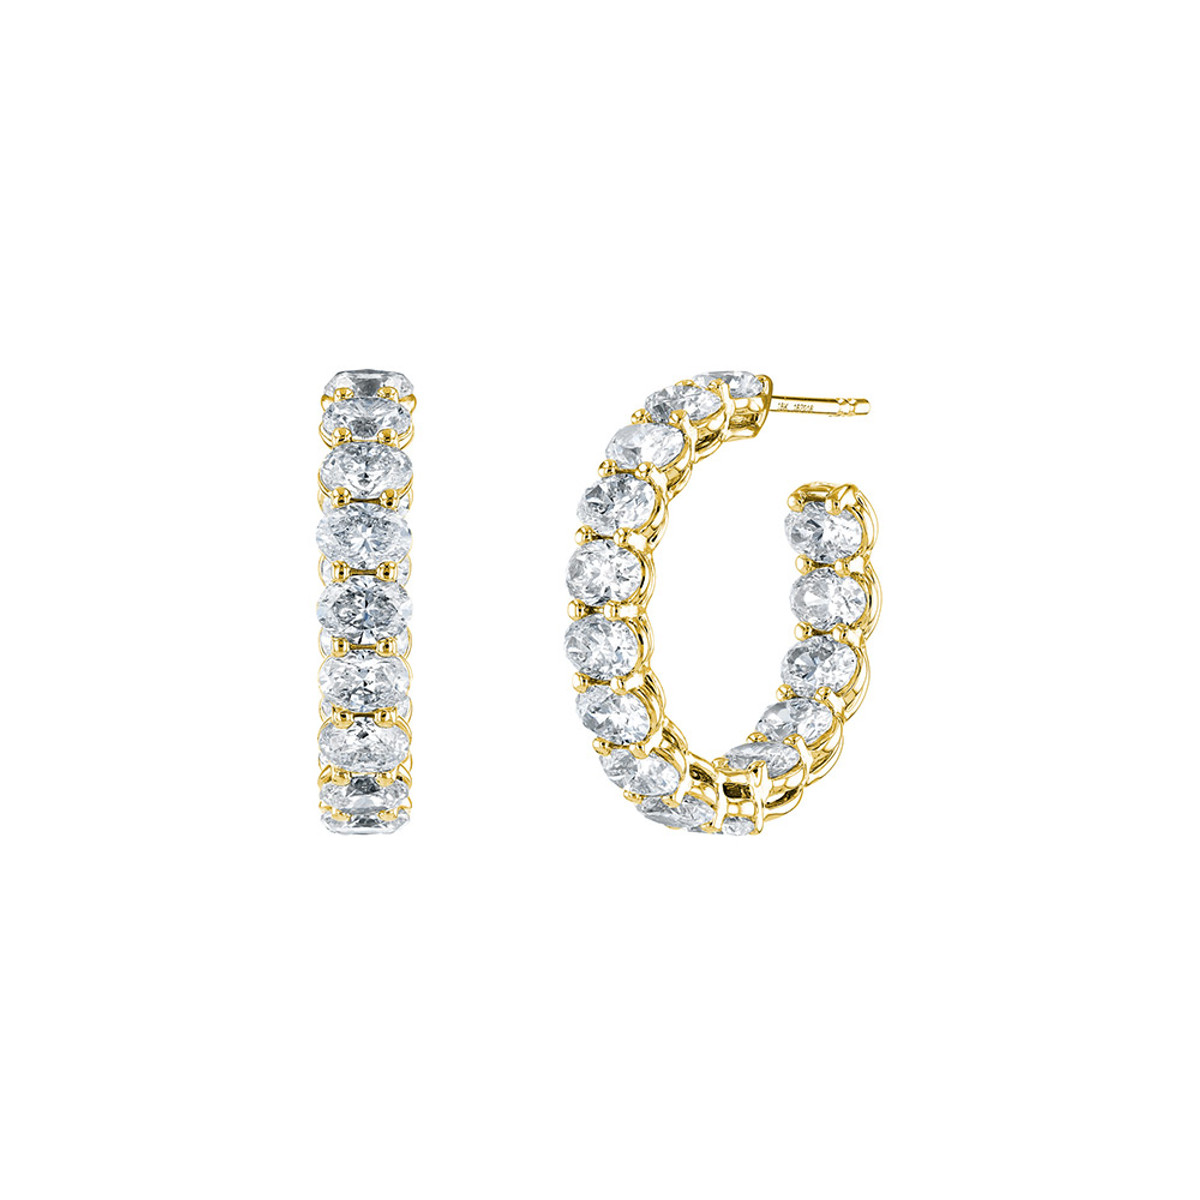 Hyde Park Collection 18K Yellow Gold Diamond Hoop Earrings-59696 Product Image